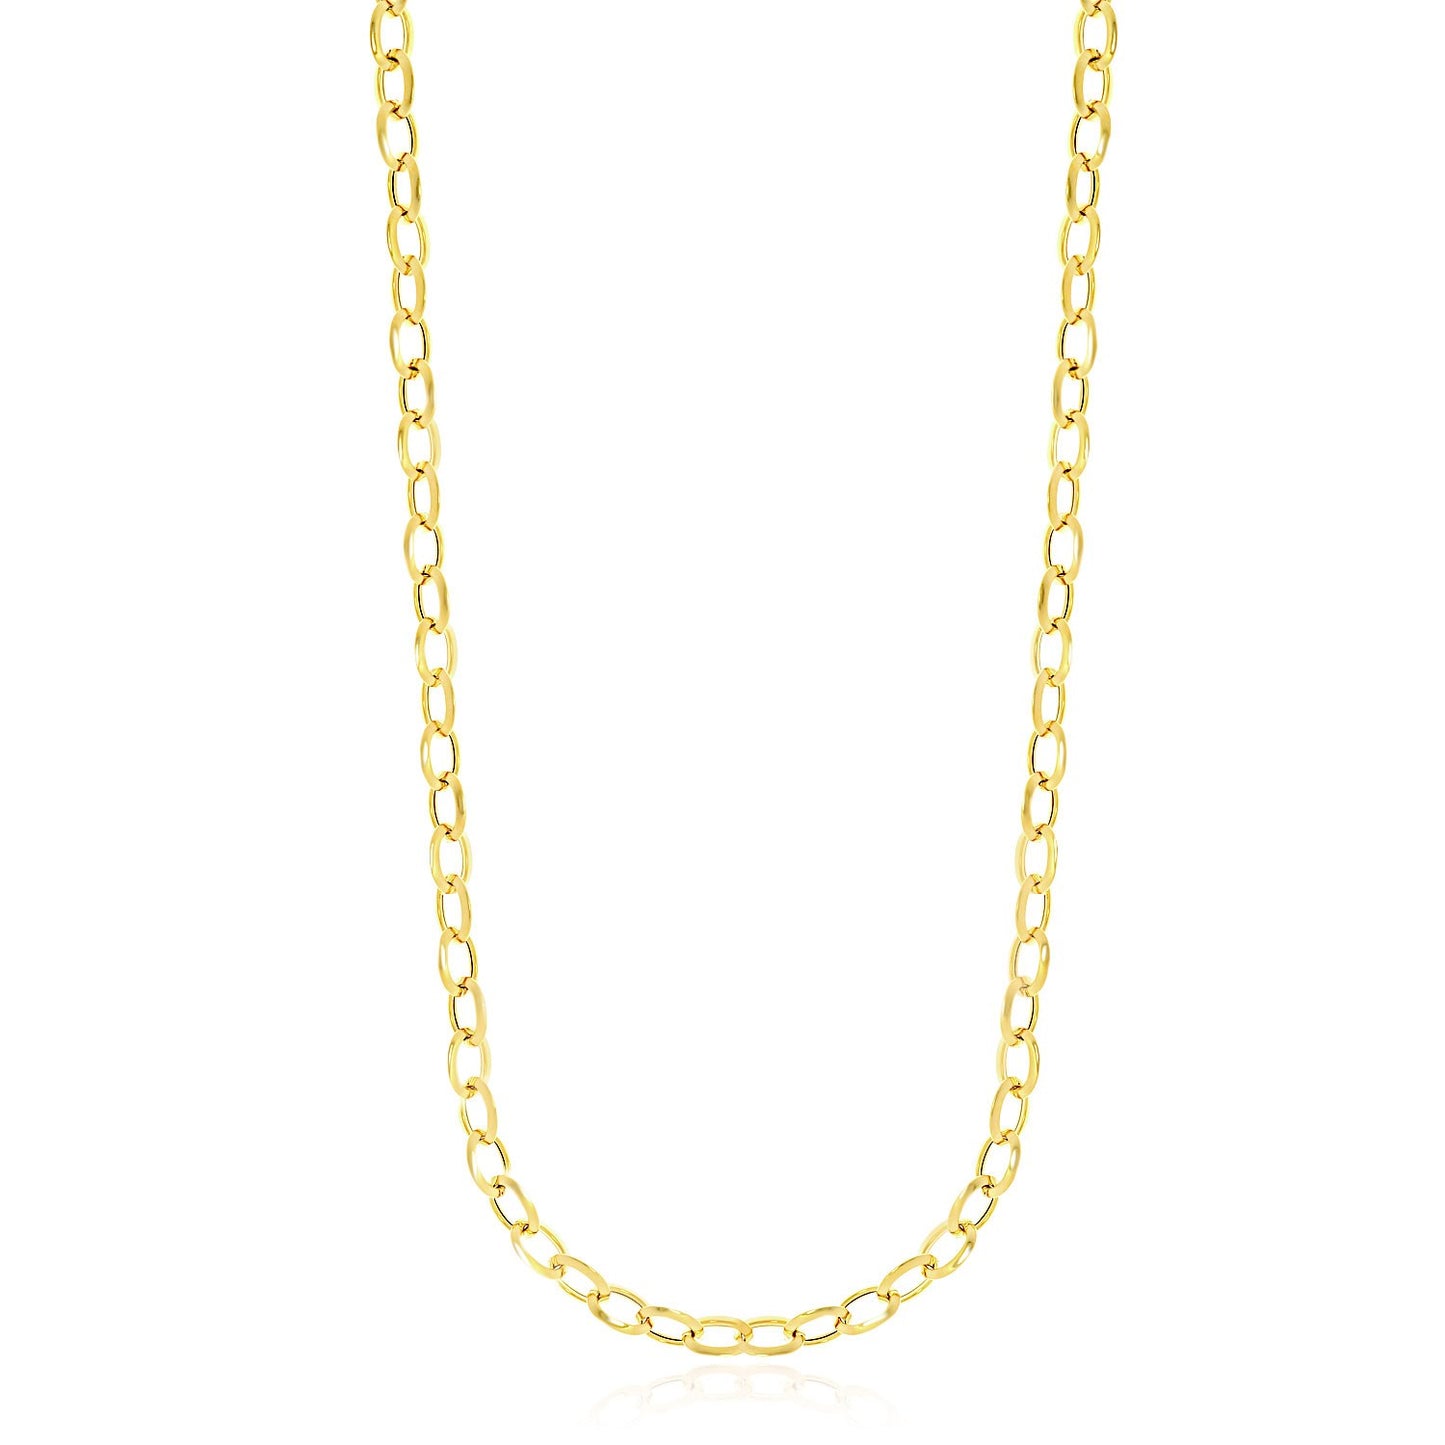 14k Yellow Gold Cable Chain Style Polished Necklace